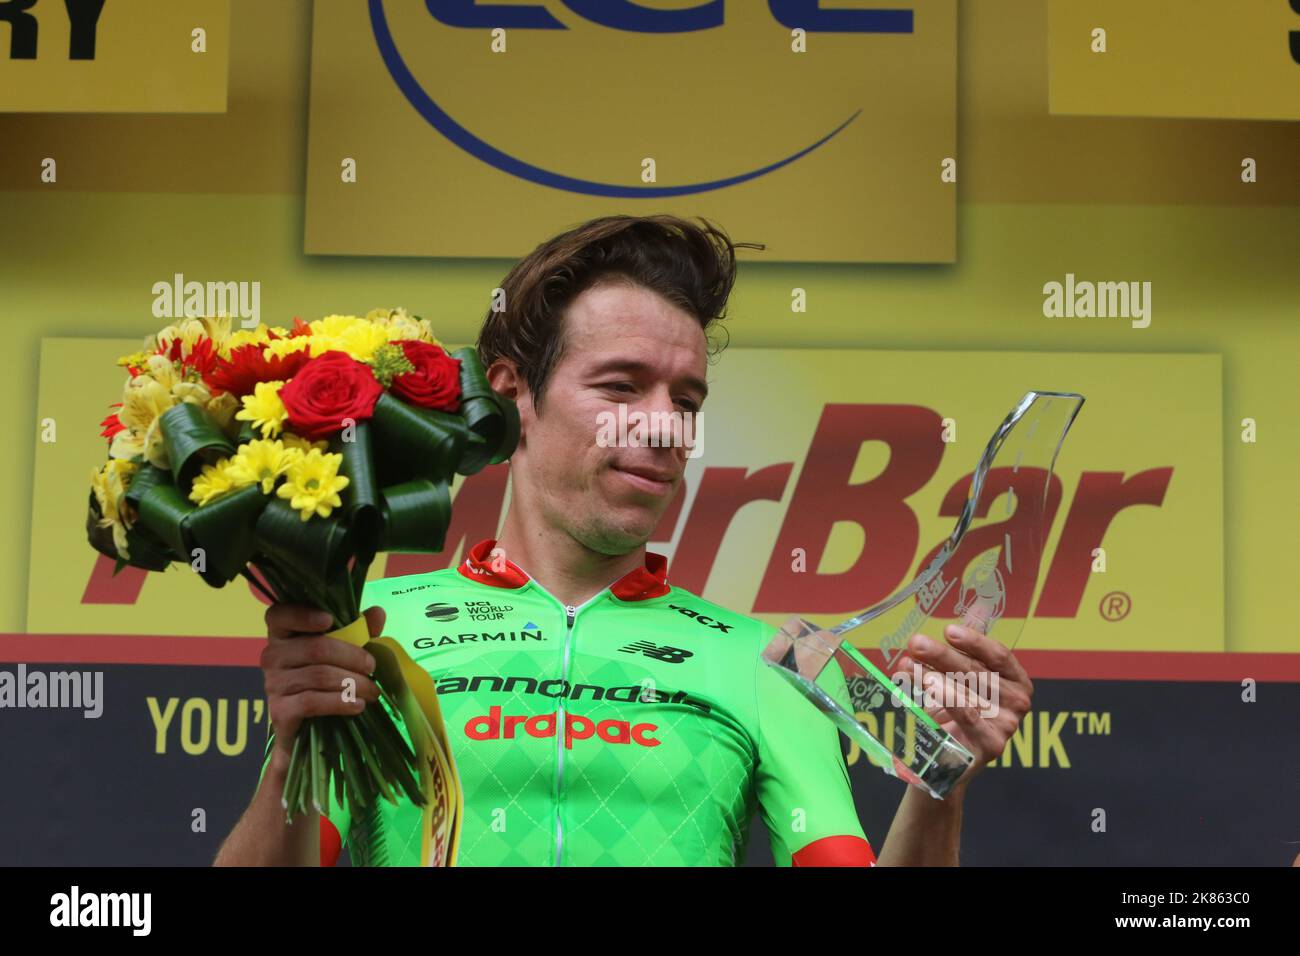 Colombia Cannondale Drapac Team's Rigoberto Uran  wins 9th stage of the Tour de France 2017 Stock Photo